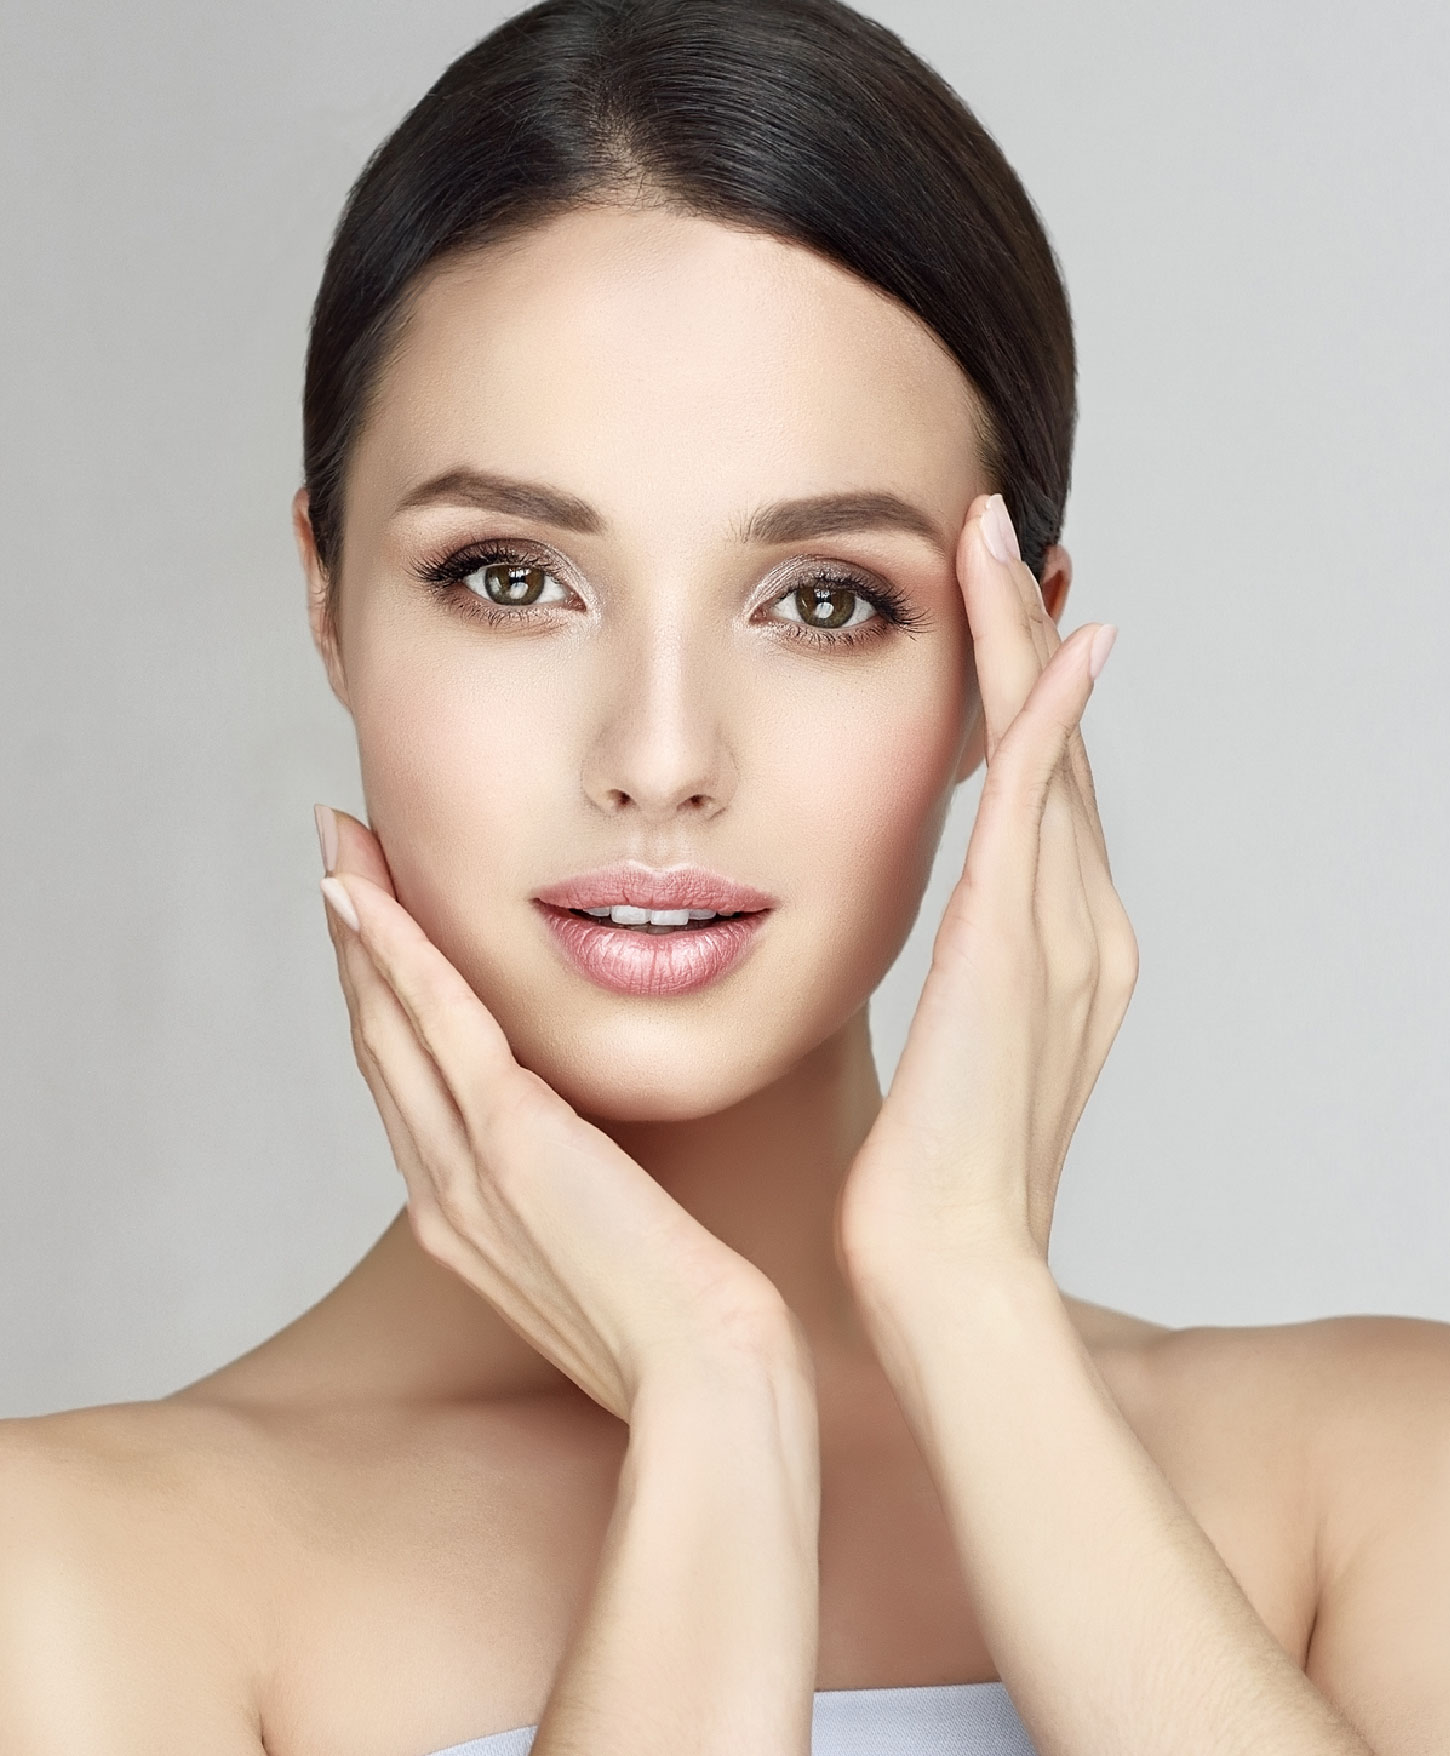 INJECTABLES AND FILLERS